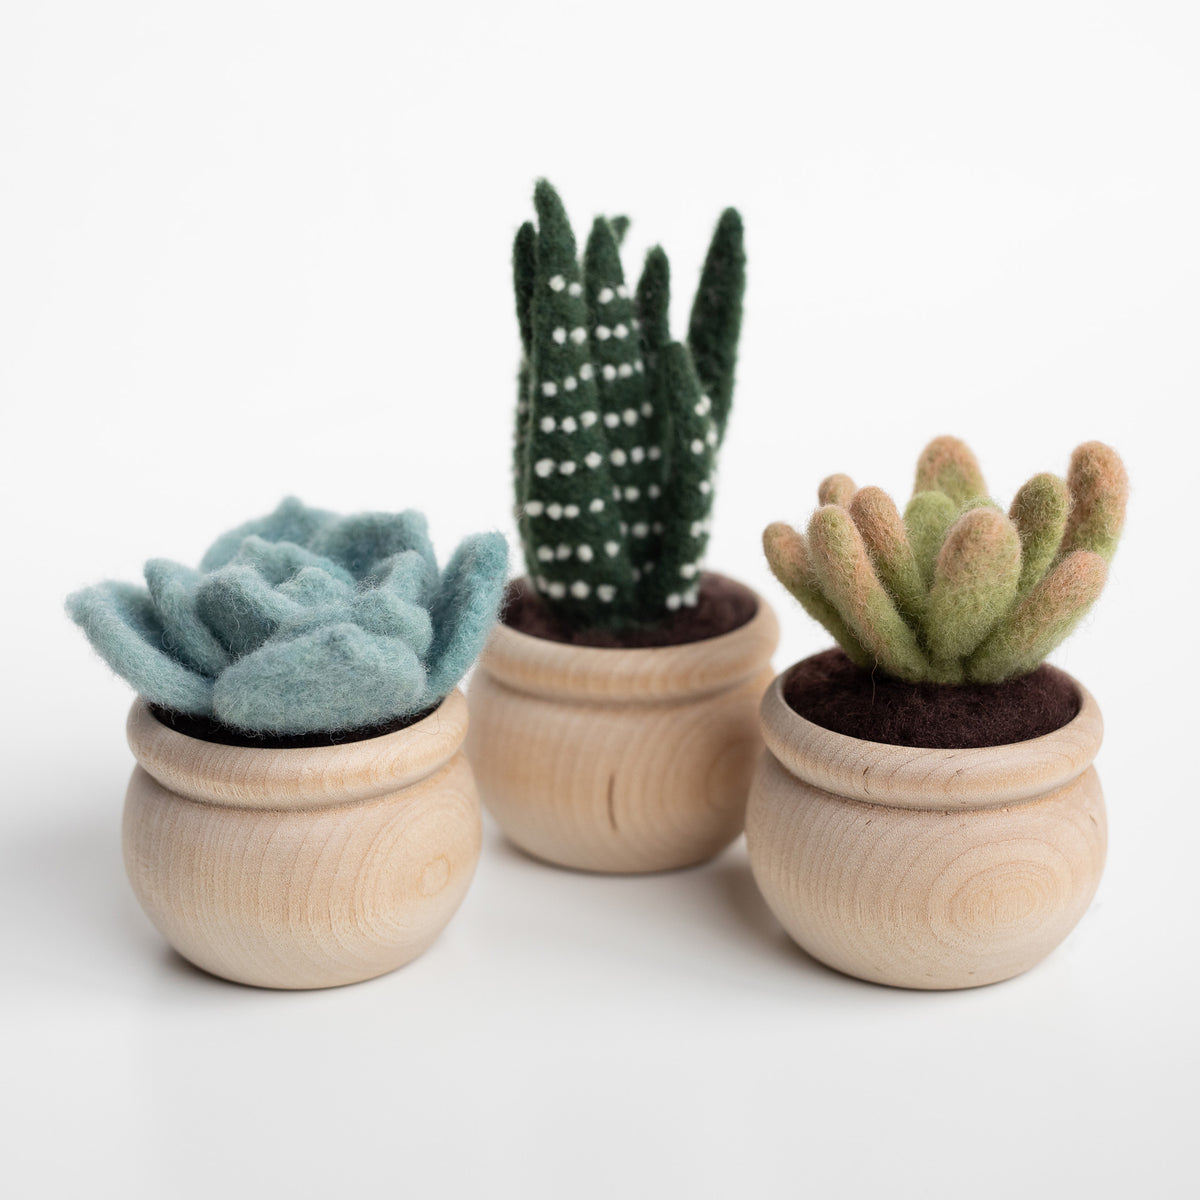 Felted Sky Succulents Sculpting with Wool Needle Felting Kit